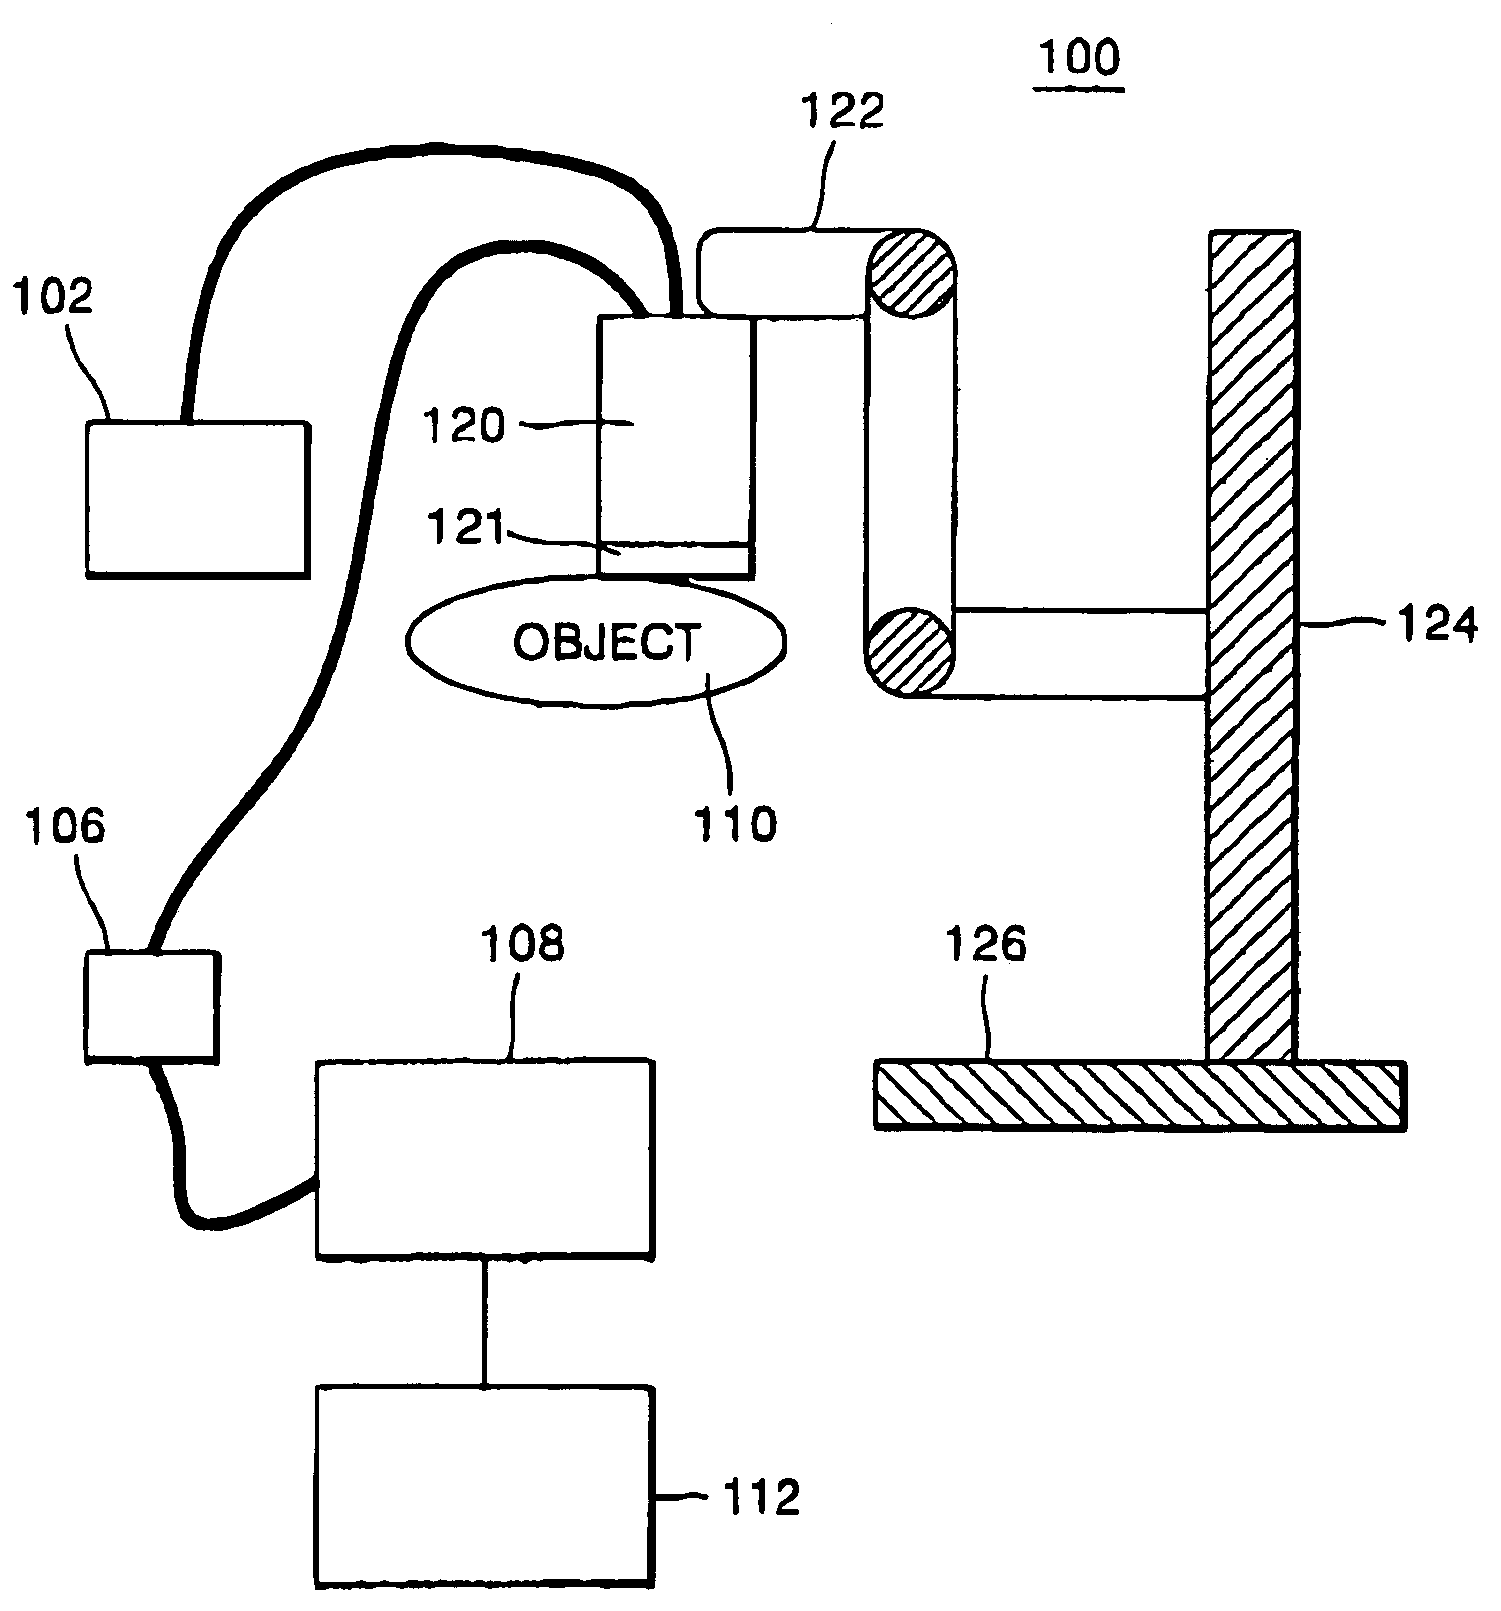 Device for and method of measuring blood flow using bio-photon emission